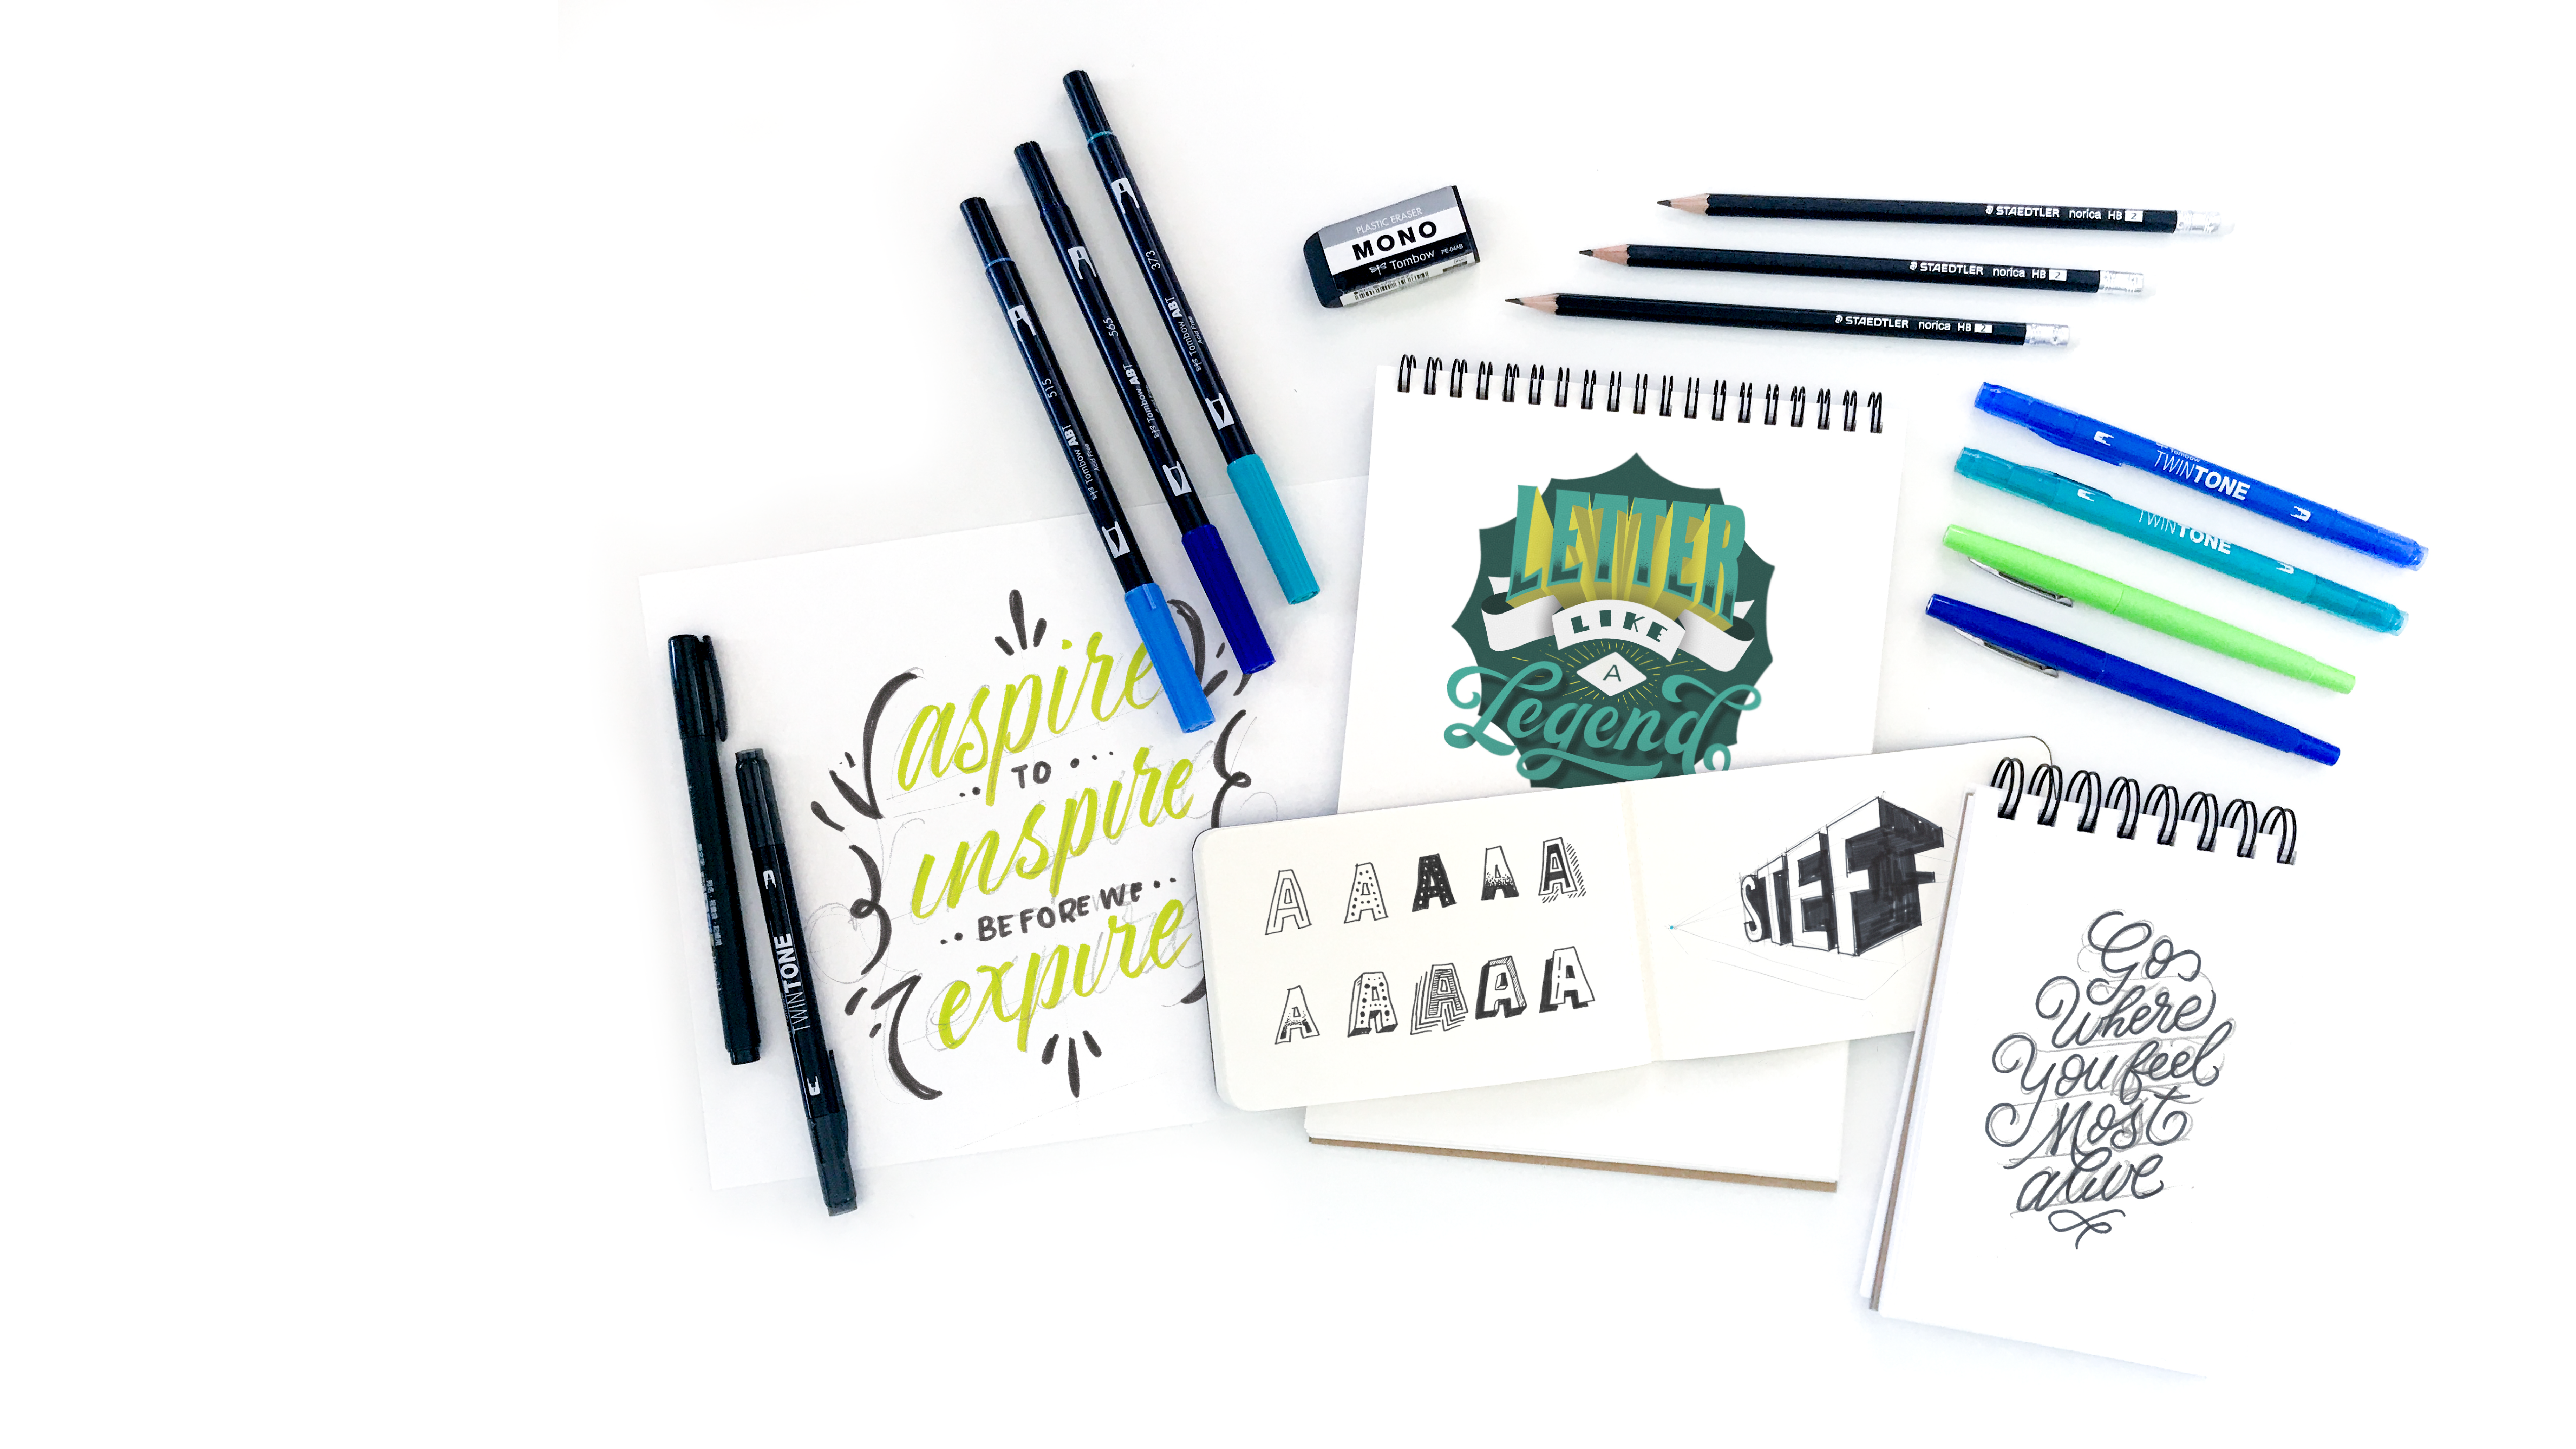 Letter Like a Legend hand lettering notebook and letter samples "Aspire to Inspire before we Expire"